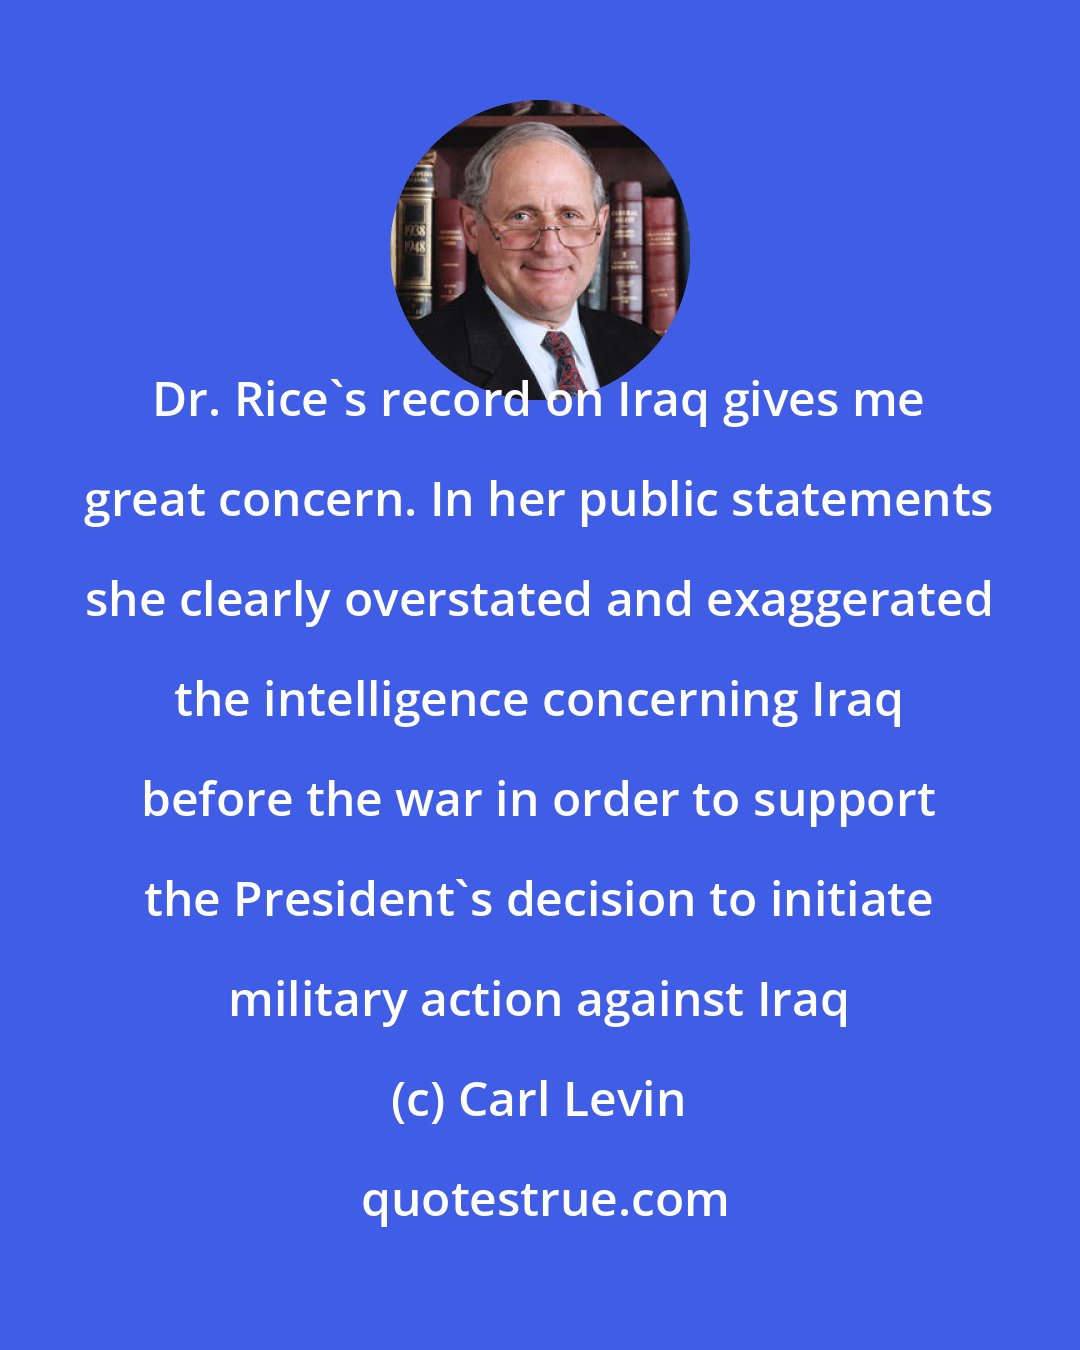 Carl Levin: Dr. Rice's record on Iraq gives me great concern. In her public statements she clearly overstated and exaggerated the intelligence concerning Iraq before the war in order to support the President's decision to initiate military action against Iraq